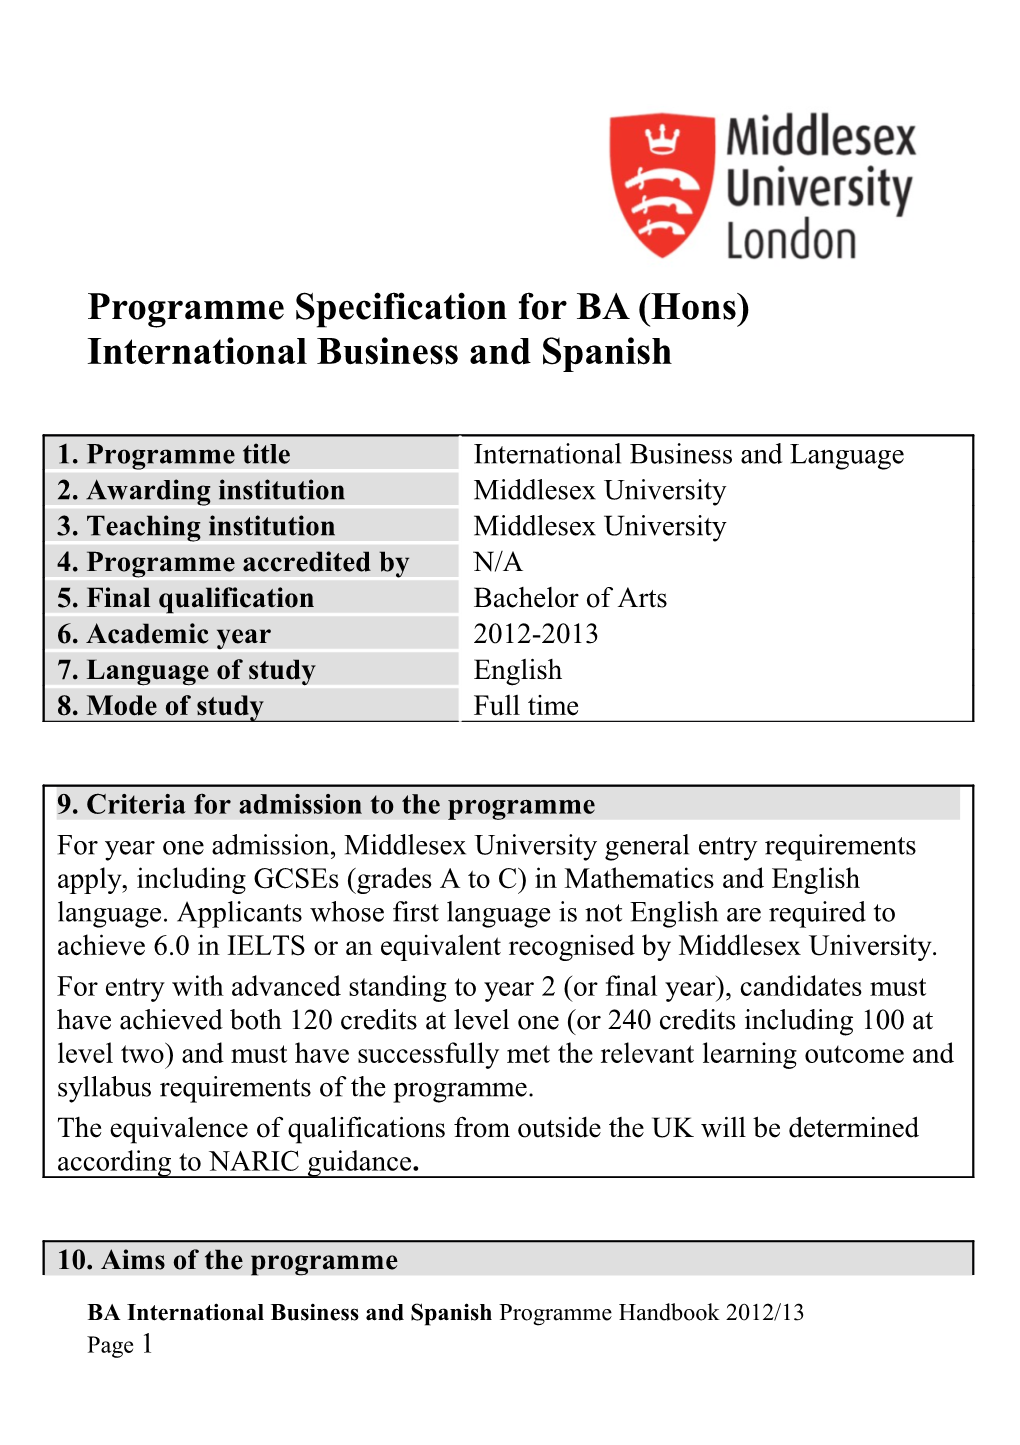 Programme Specification for BA (Hons) International Business and Spanish